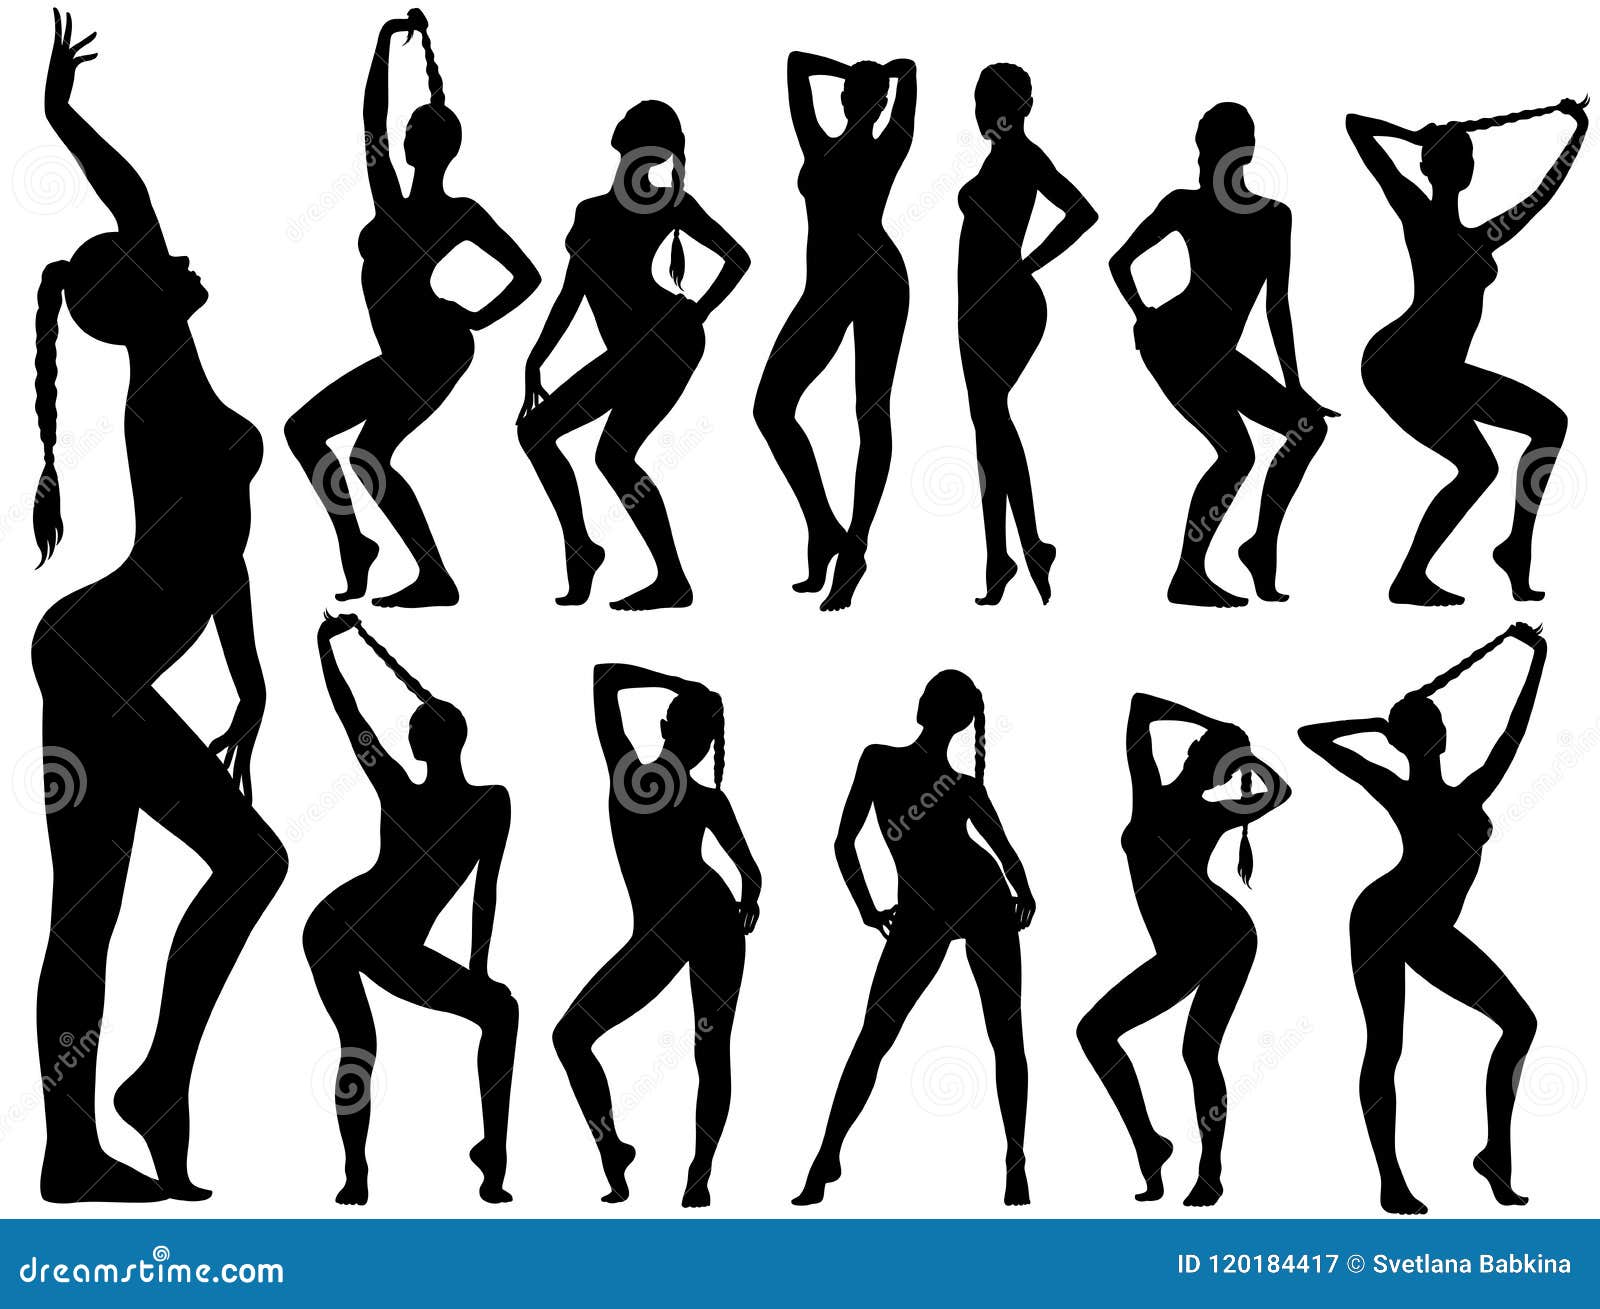 Silhouettes Of Pinup Girls Sitting In Poses Stock Vector Illustration Of Icon Dance 120184417